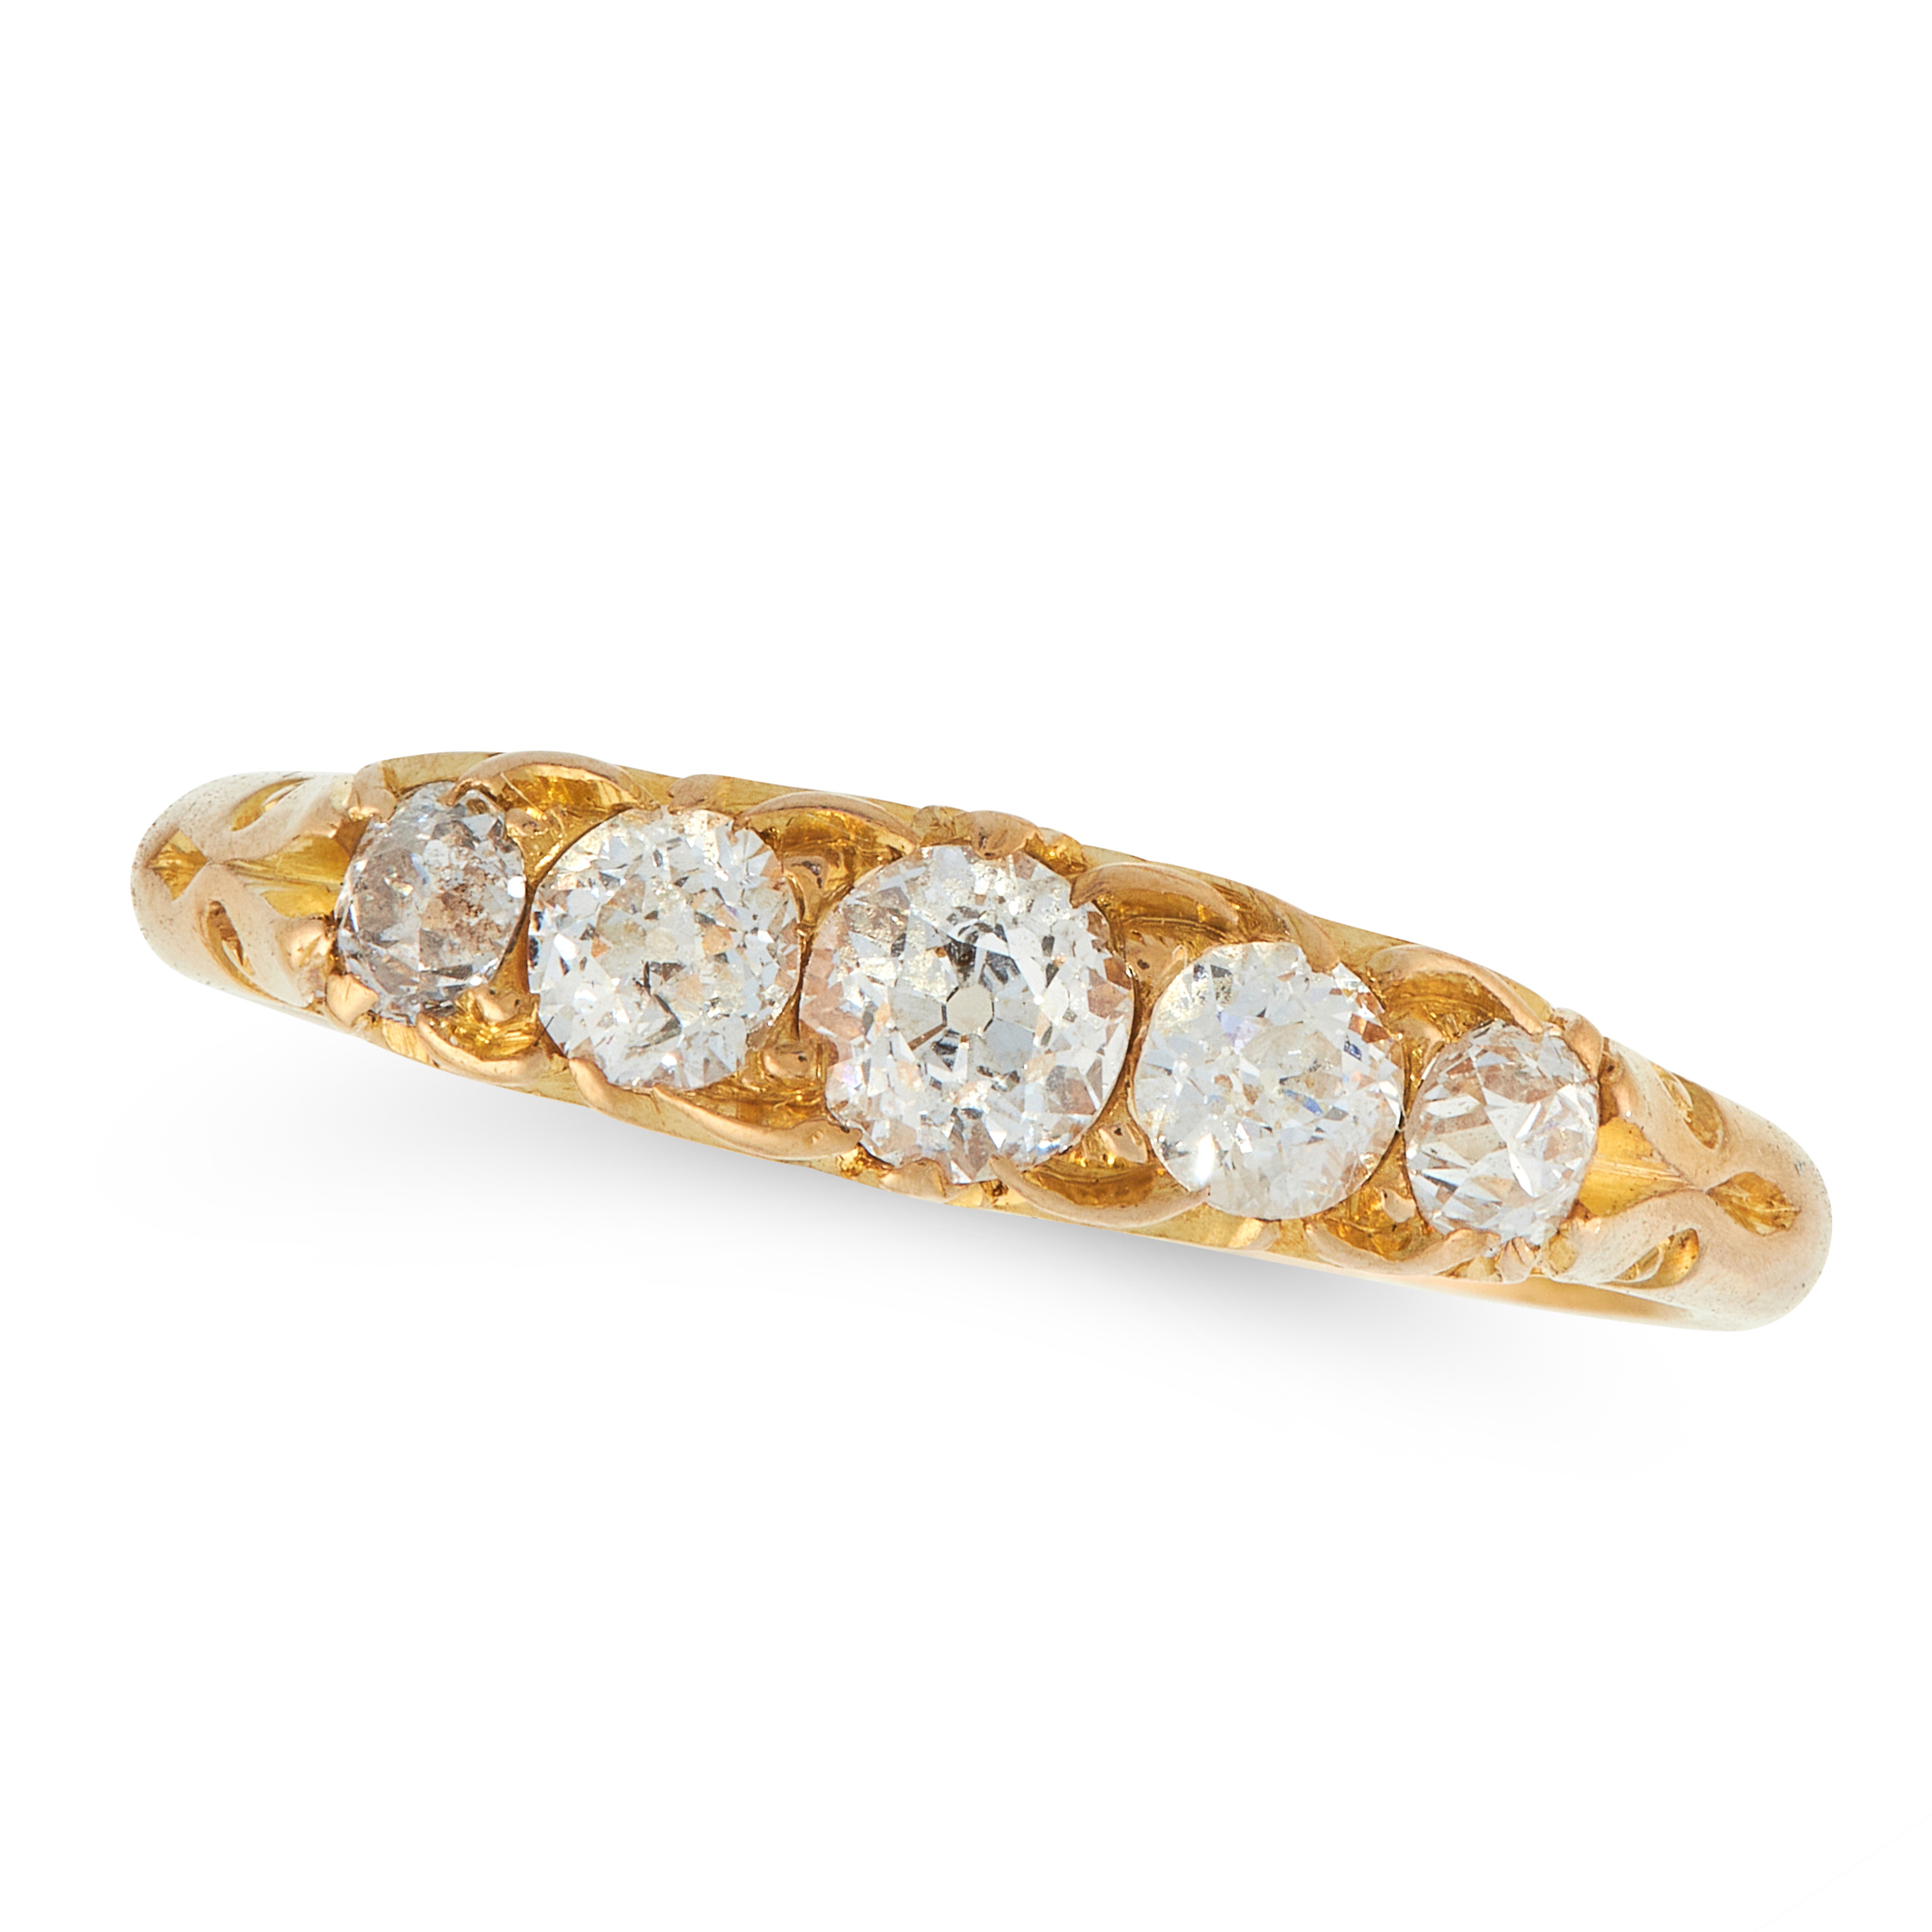 AN ANTIQUE DIAMOND DRESS RING, CIRCA 1885 in high carat yellow gold, set with a row of five